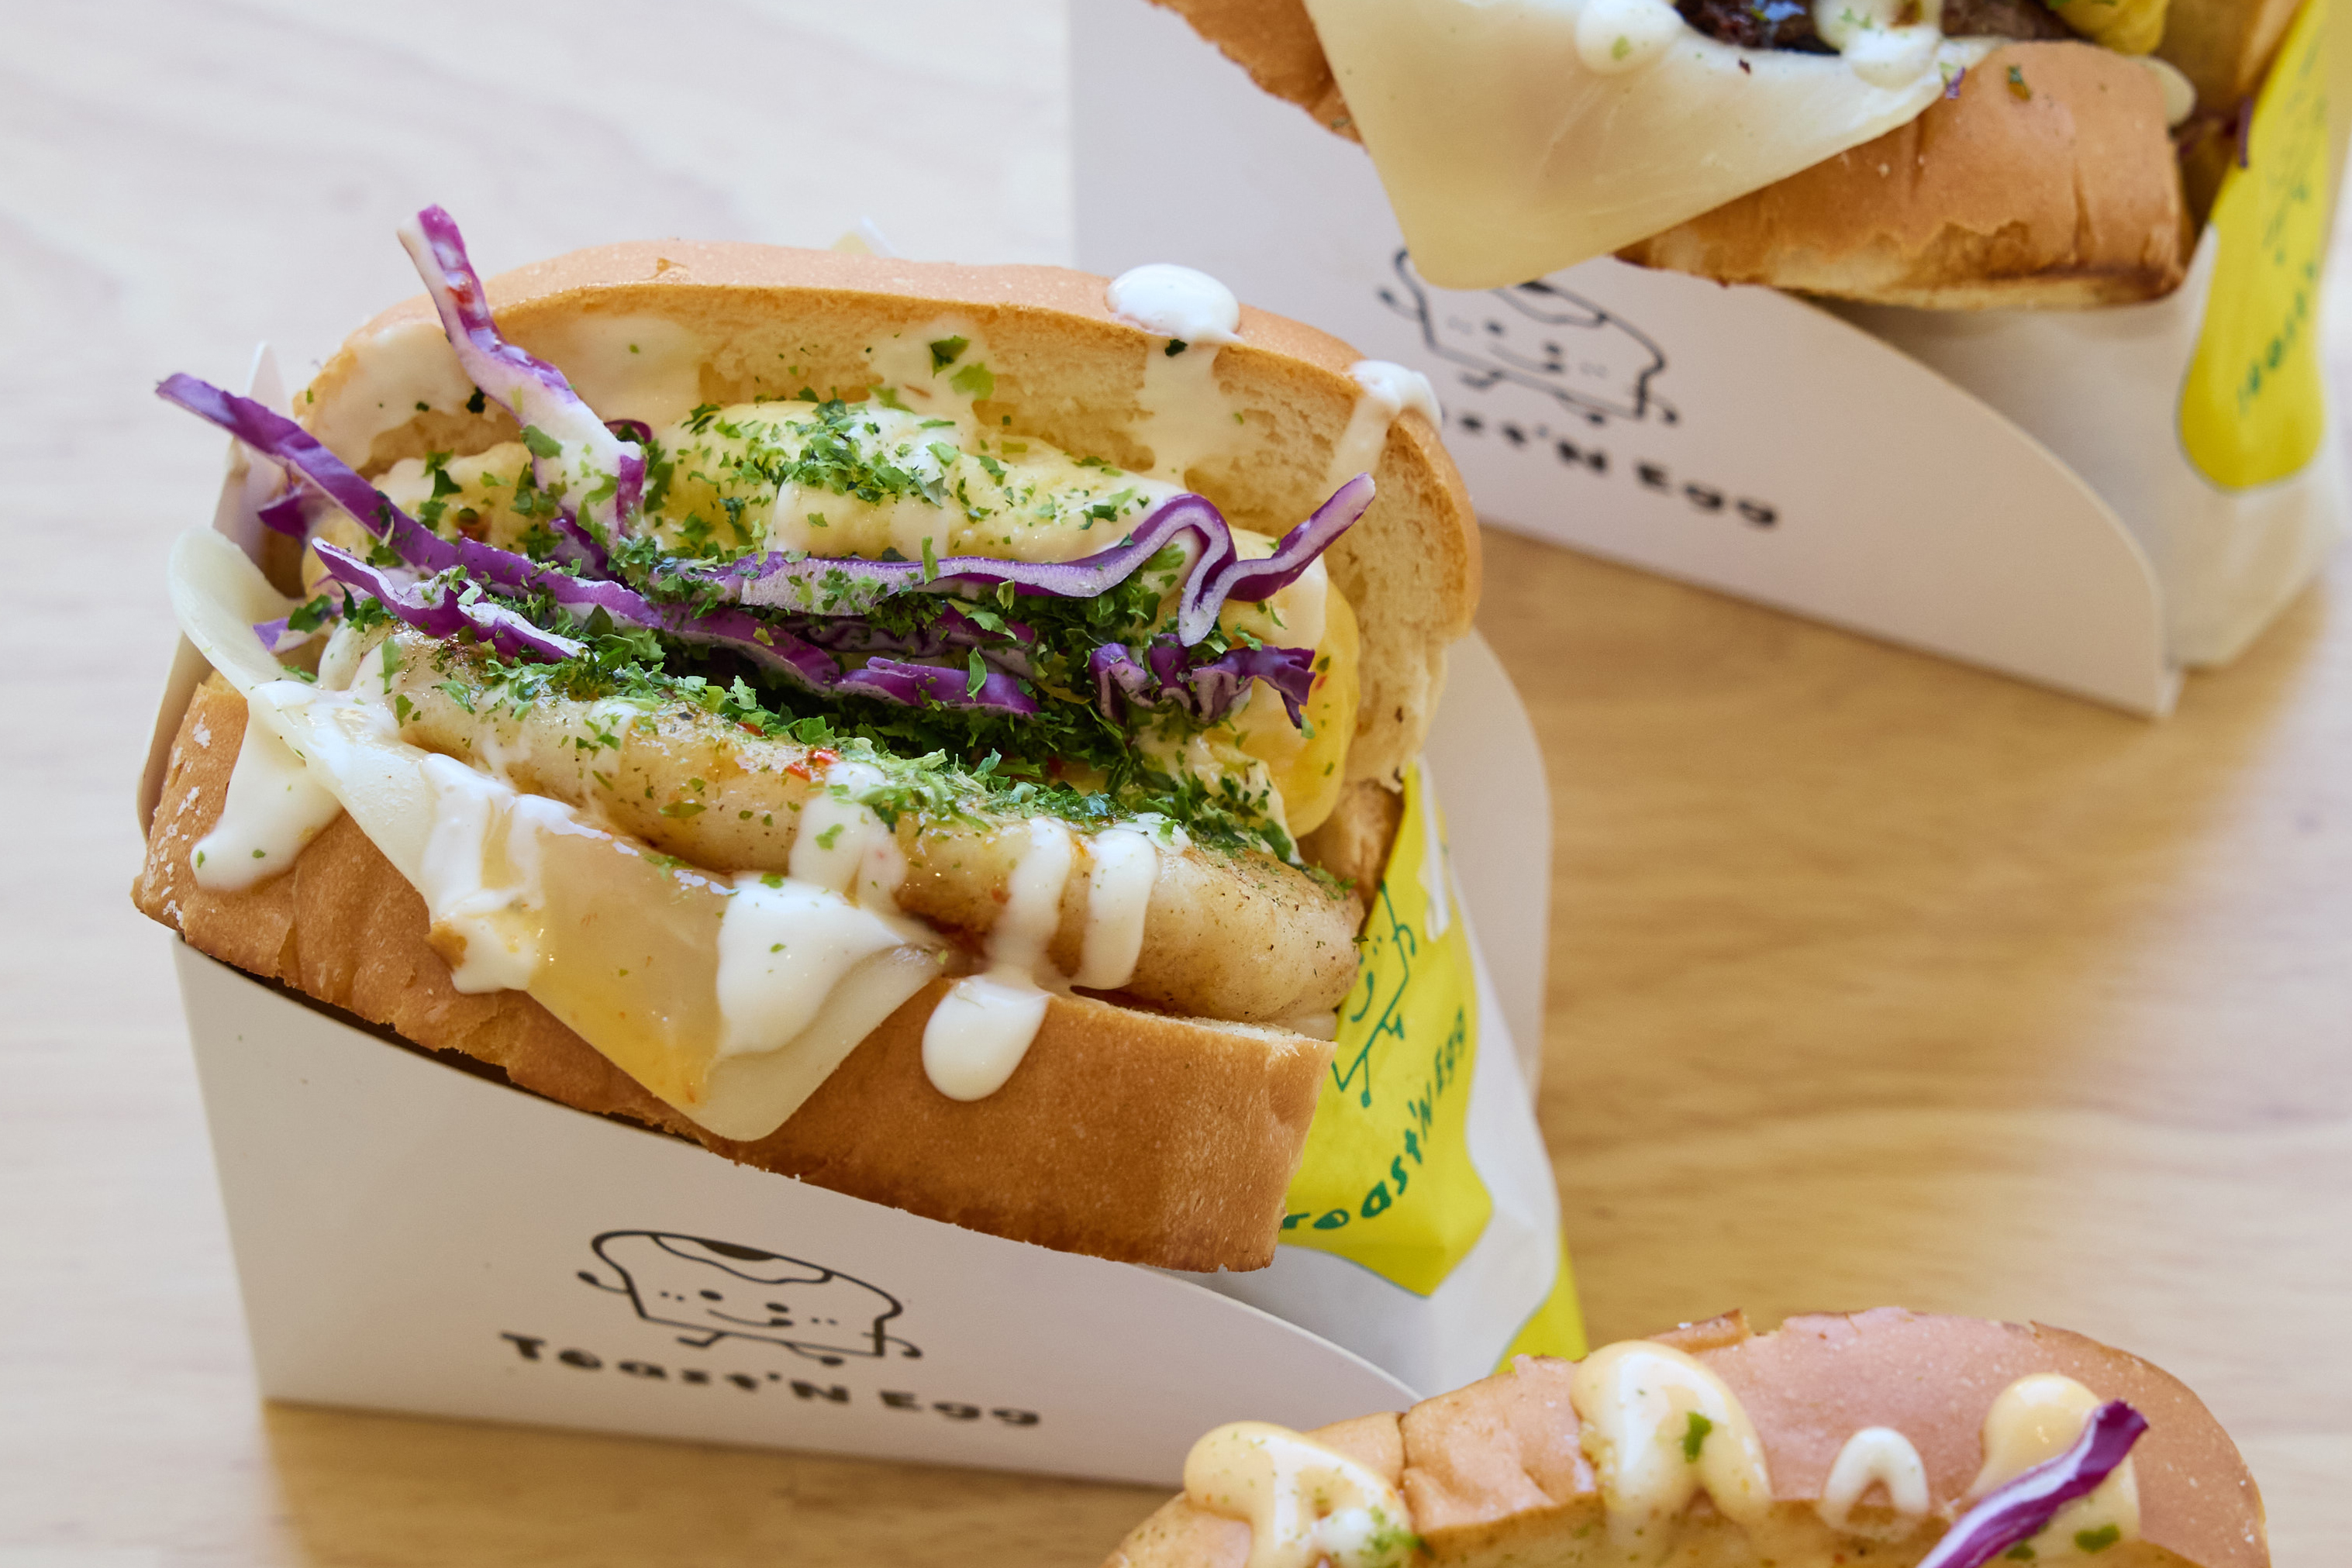 Three sandwiches in white containers have fluffy bread, topped with cheese, purple cabbage, sauces, and herbs. The label on the container shows a cute toast character.